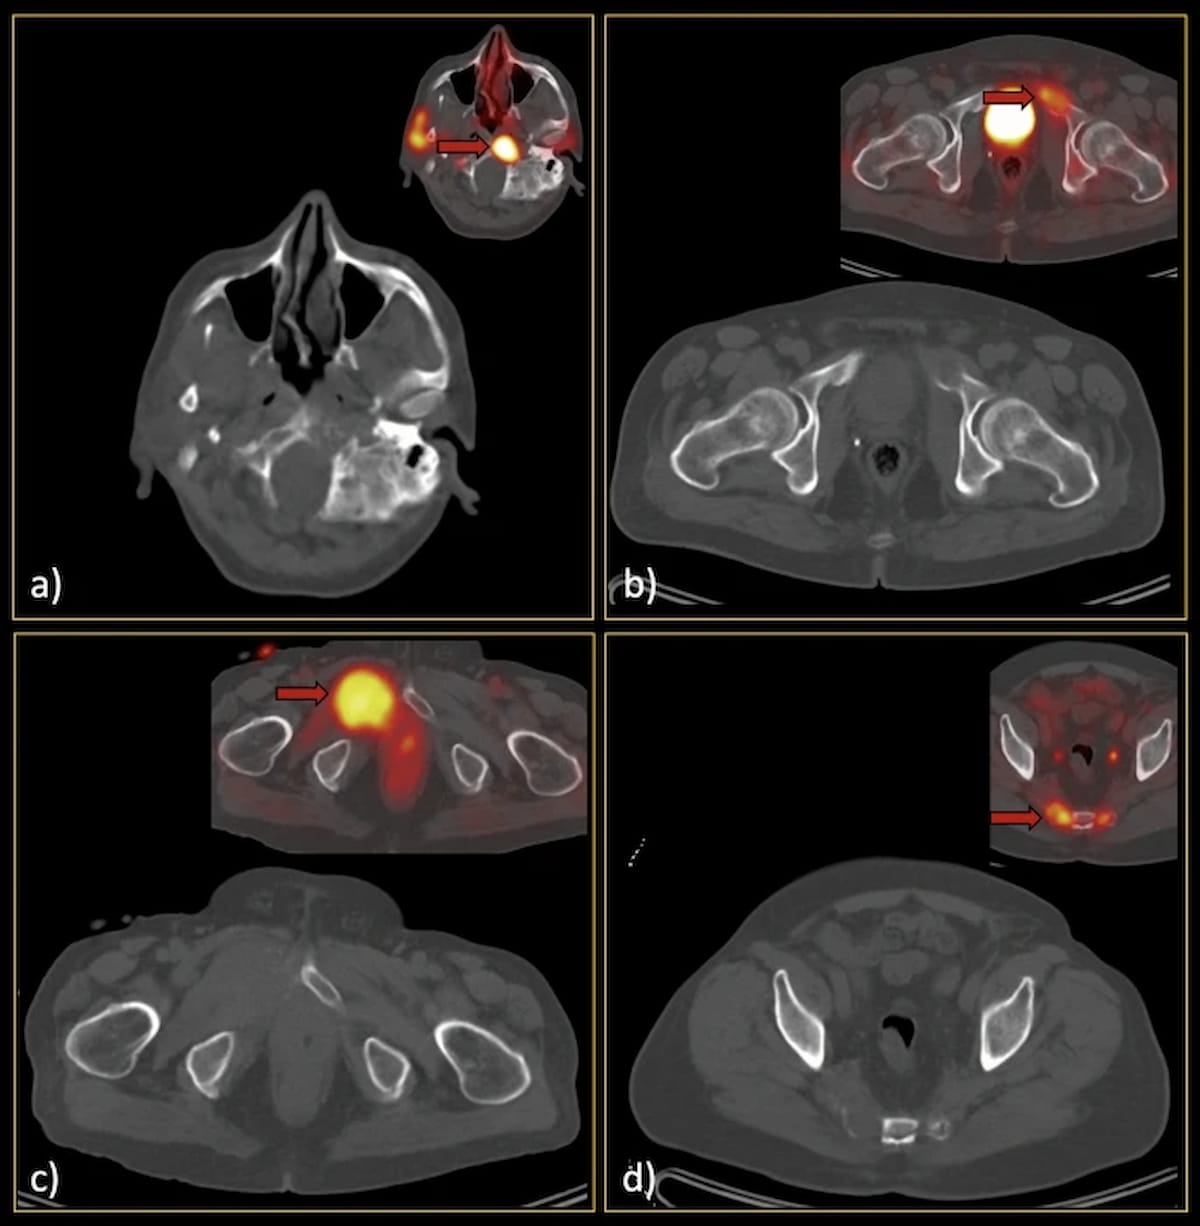 Can Low-Dose CT Have an Impact in Diagnosing Bone Metastasis in Patients with Prostate Cancer?